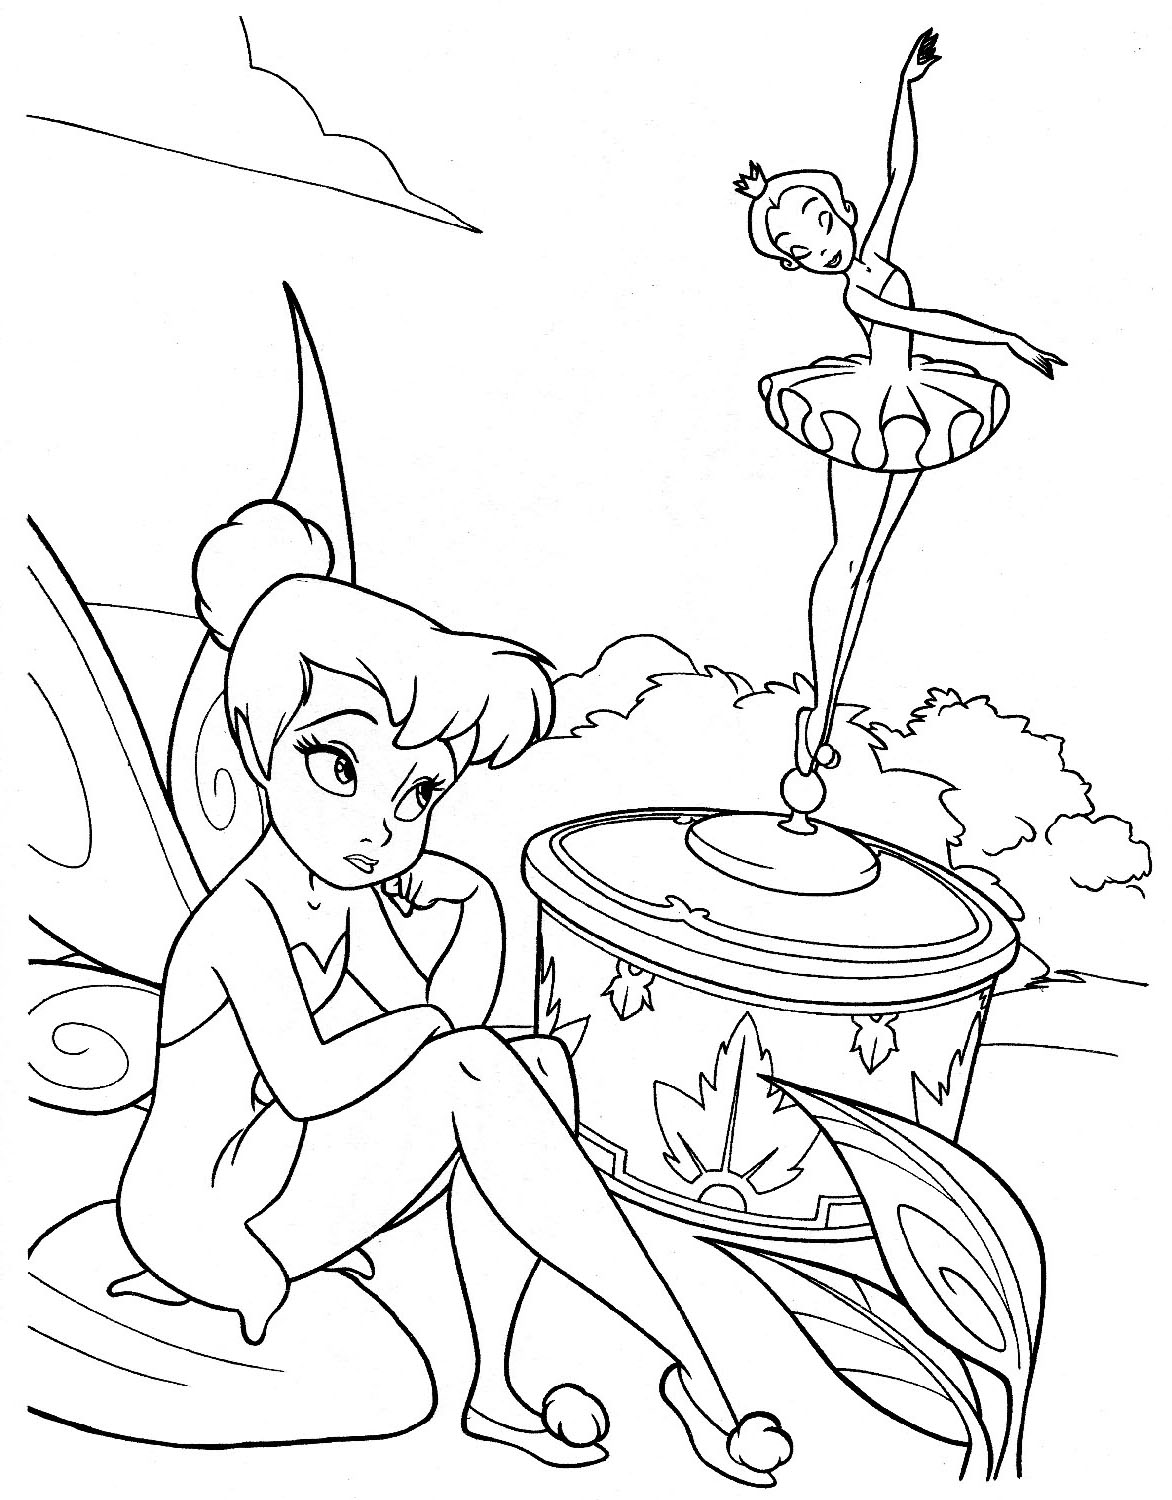 Free Printable Tinkerbell Coloring Pages For Kids